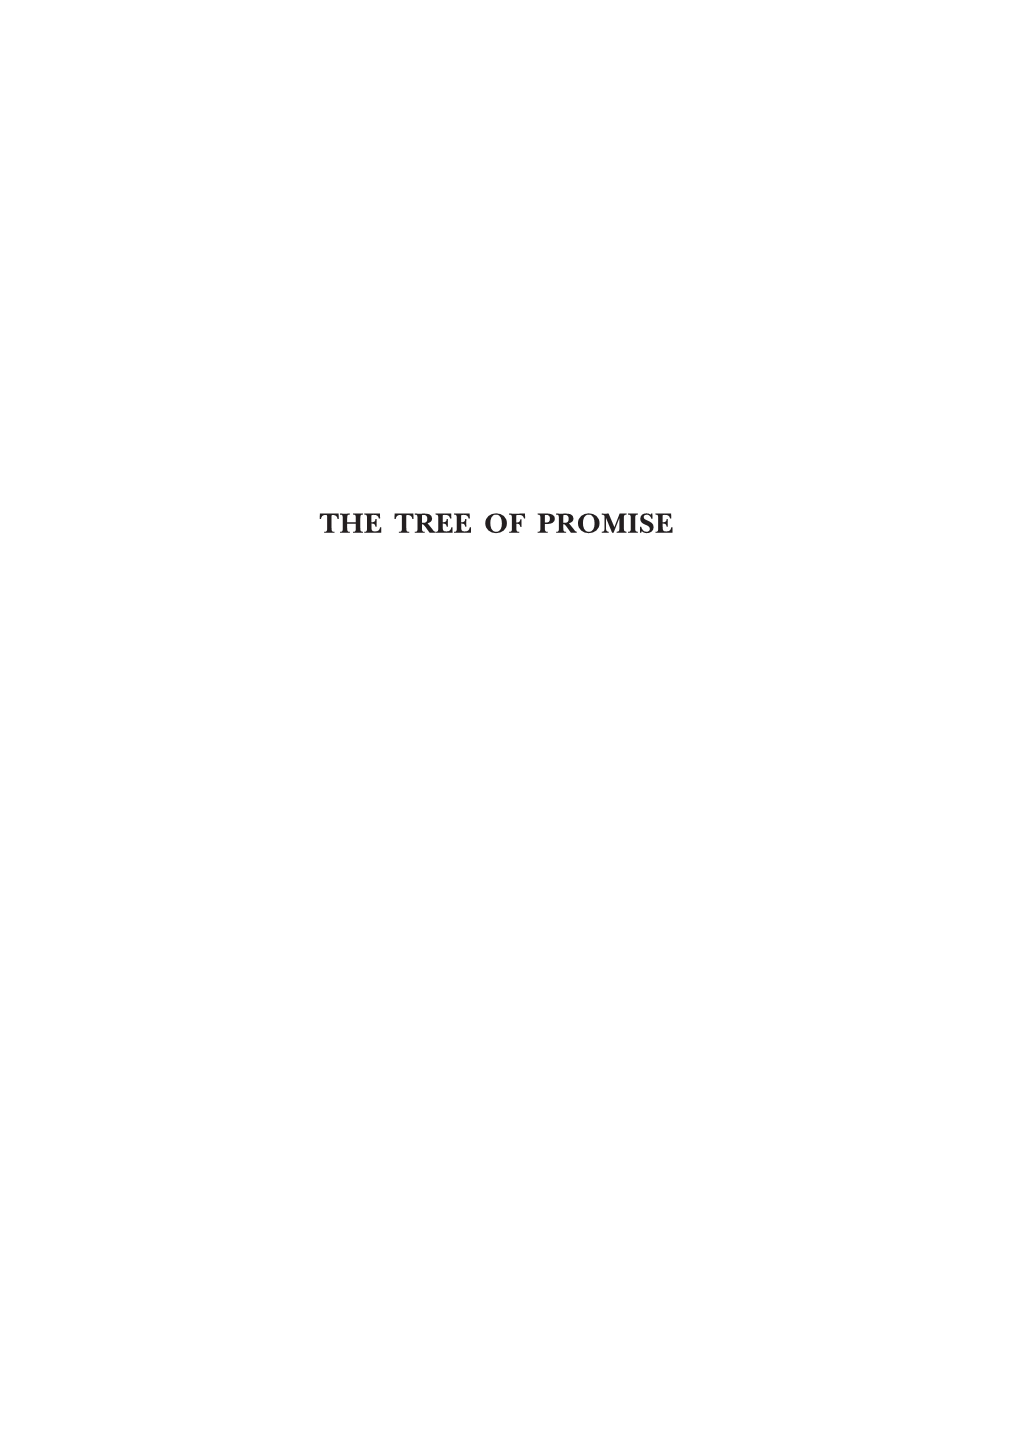 The Tree of Promise the Tree of Promise